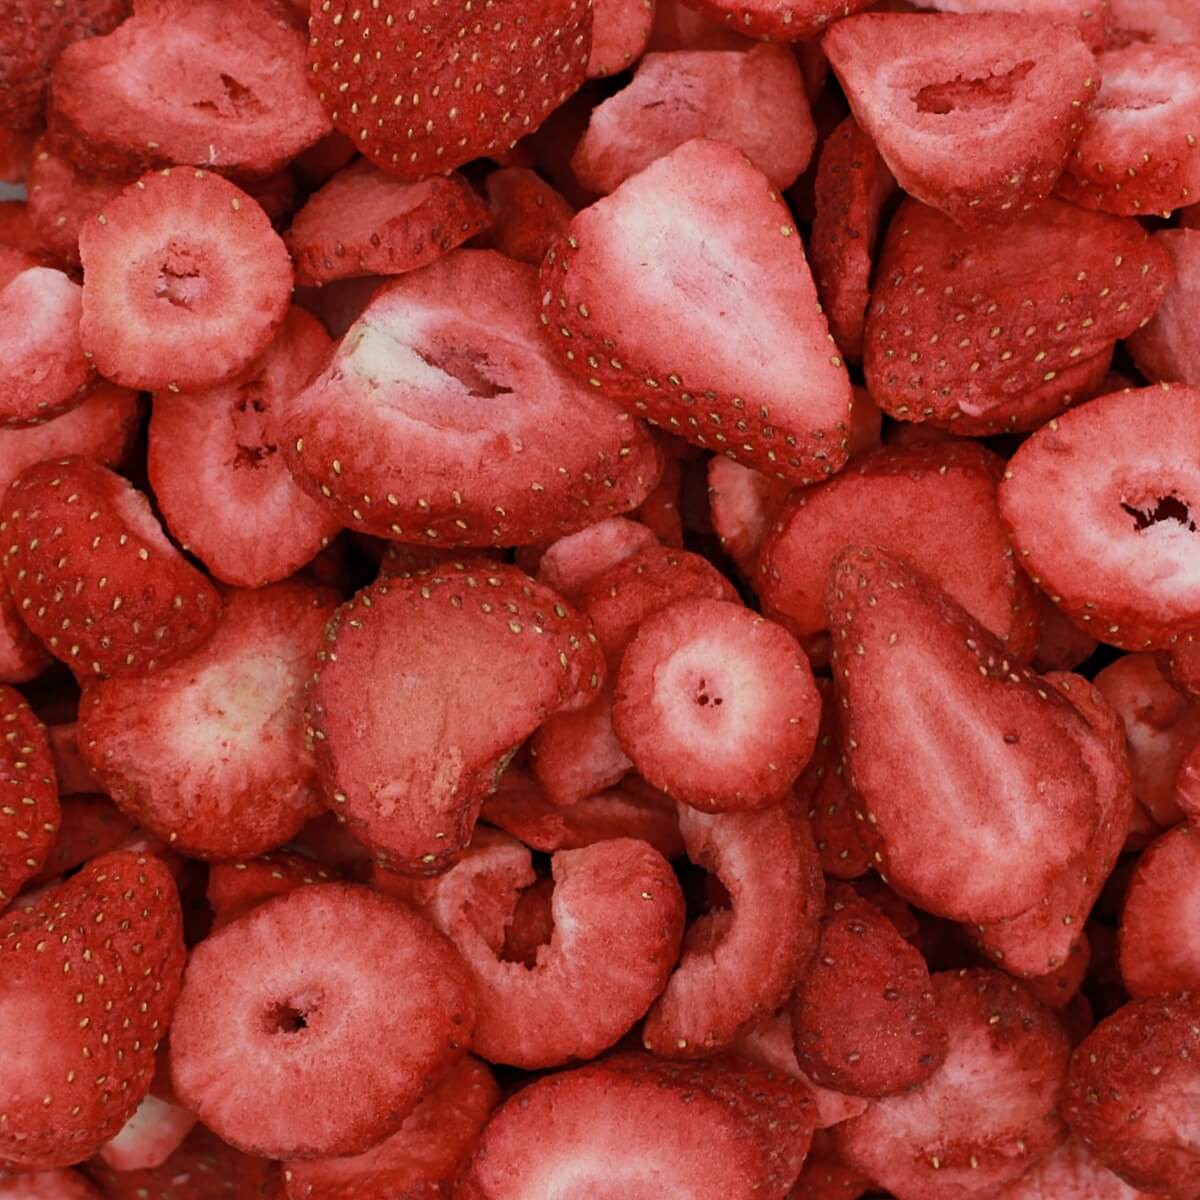 A close up image of freeze-dried strawberries.